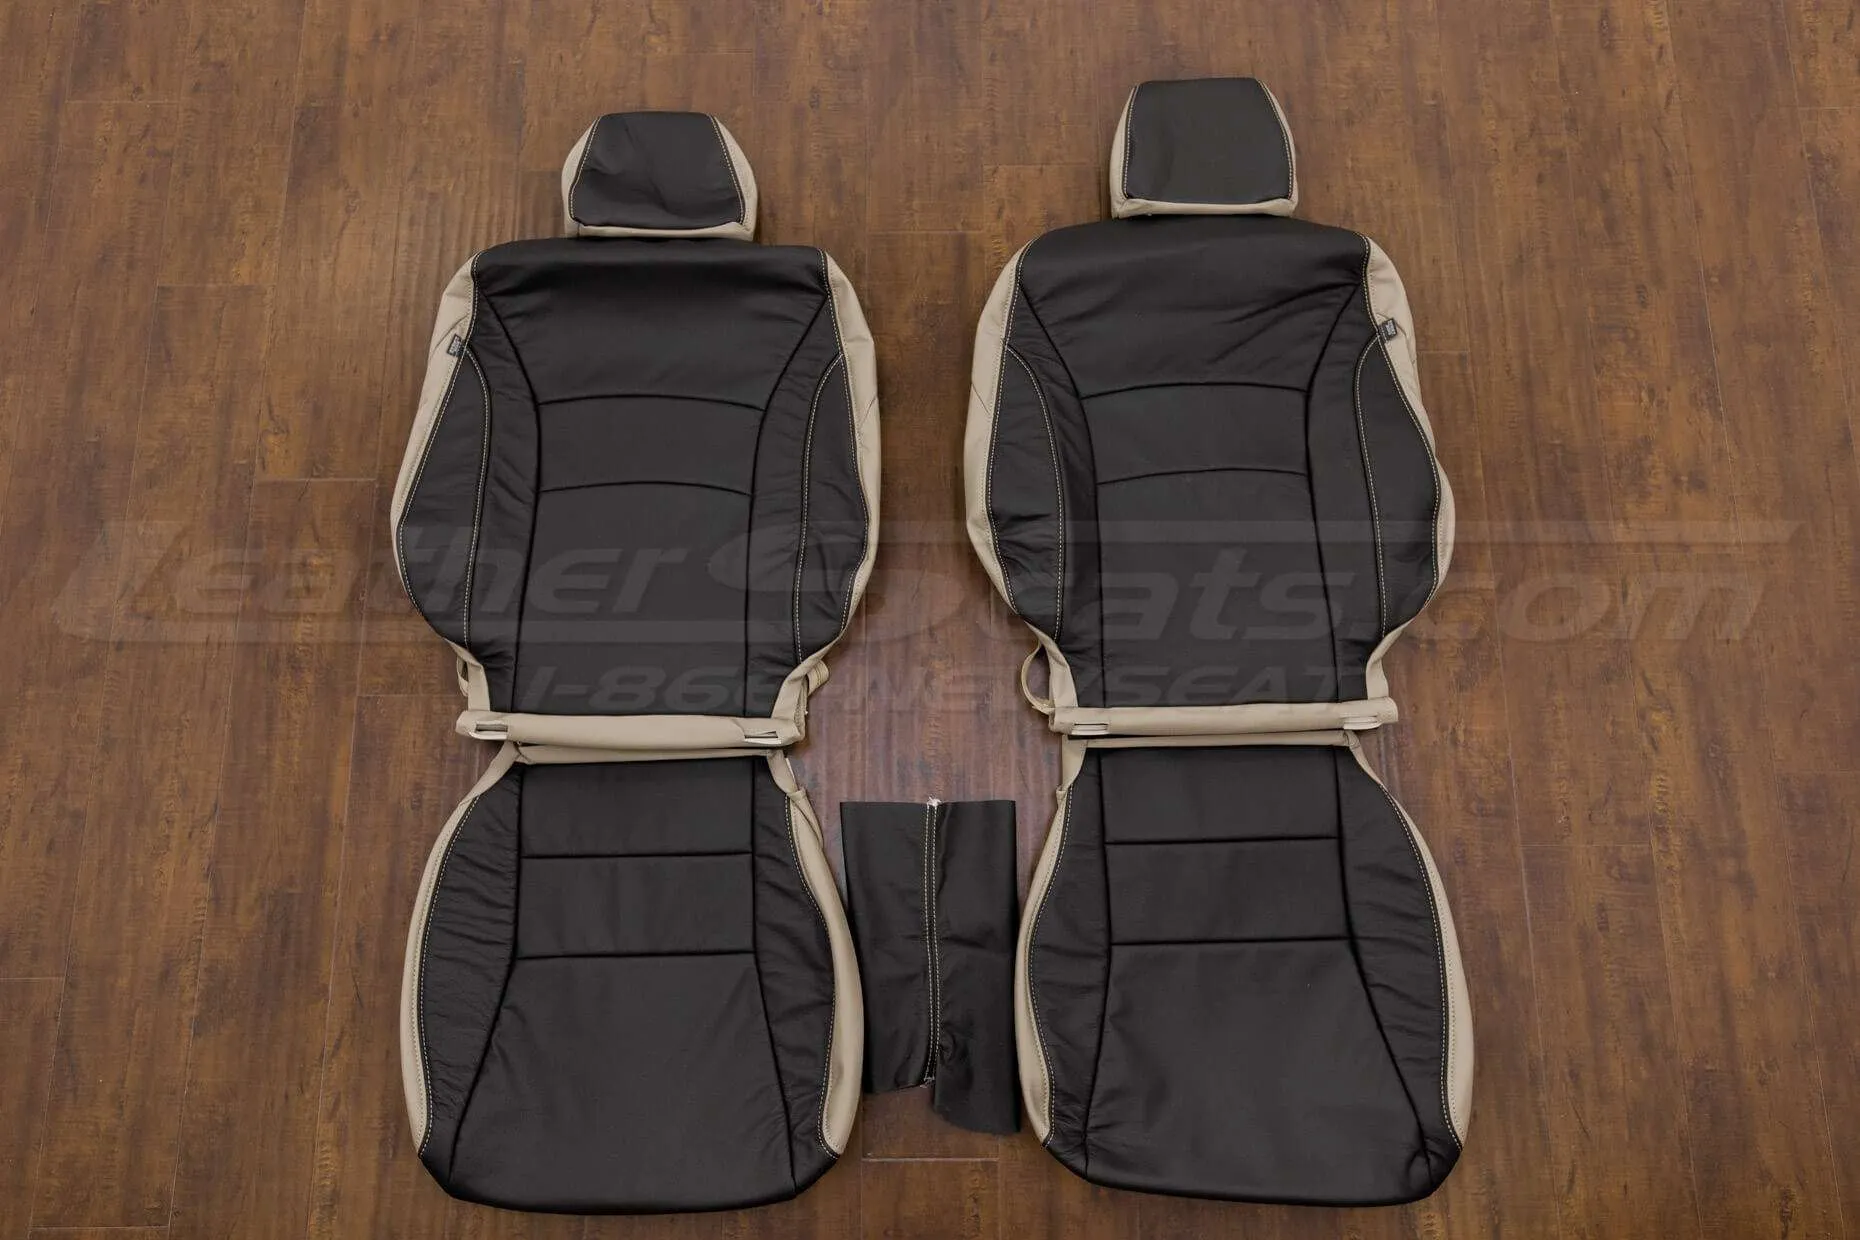 Honda Accord Leather Seat Kit- Ivory & Black - Front seat upholstery with console lid cover